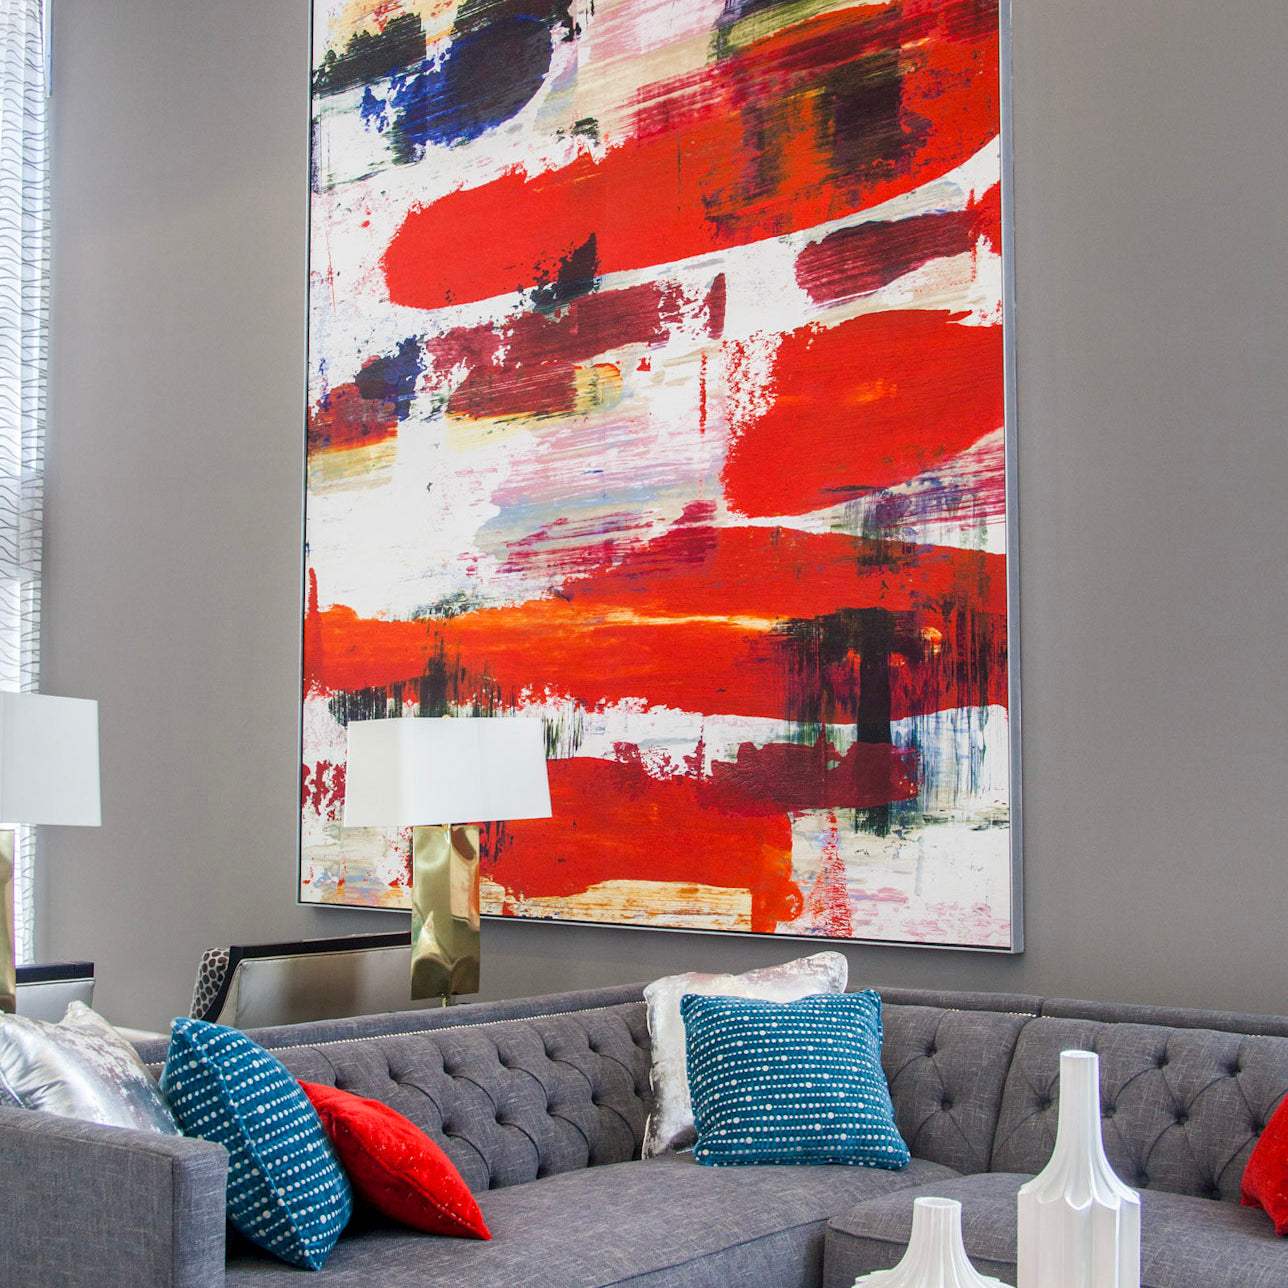 An abstract painting with bold brushstrokes in red, blue, and white dominates the lobby of Next on Sixth Apartments, complementing the sleek grey couch and vibrant throw pillows, contributing to the stylish atmosphere.